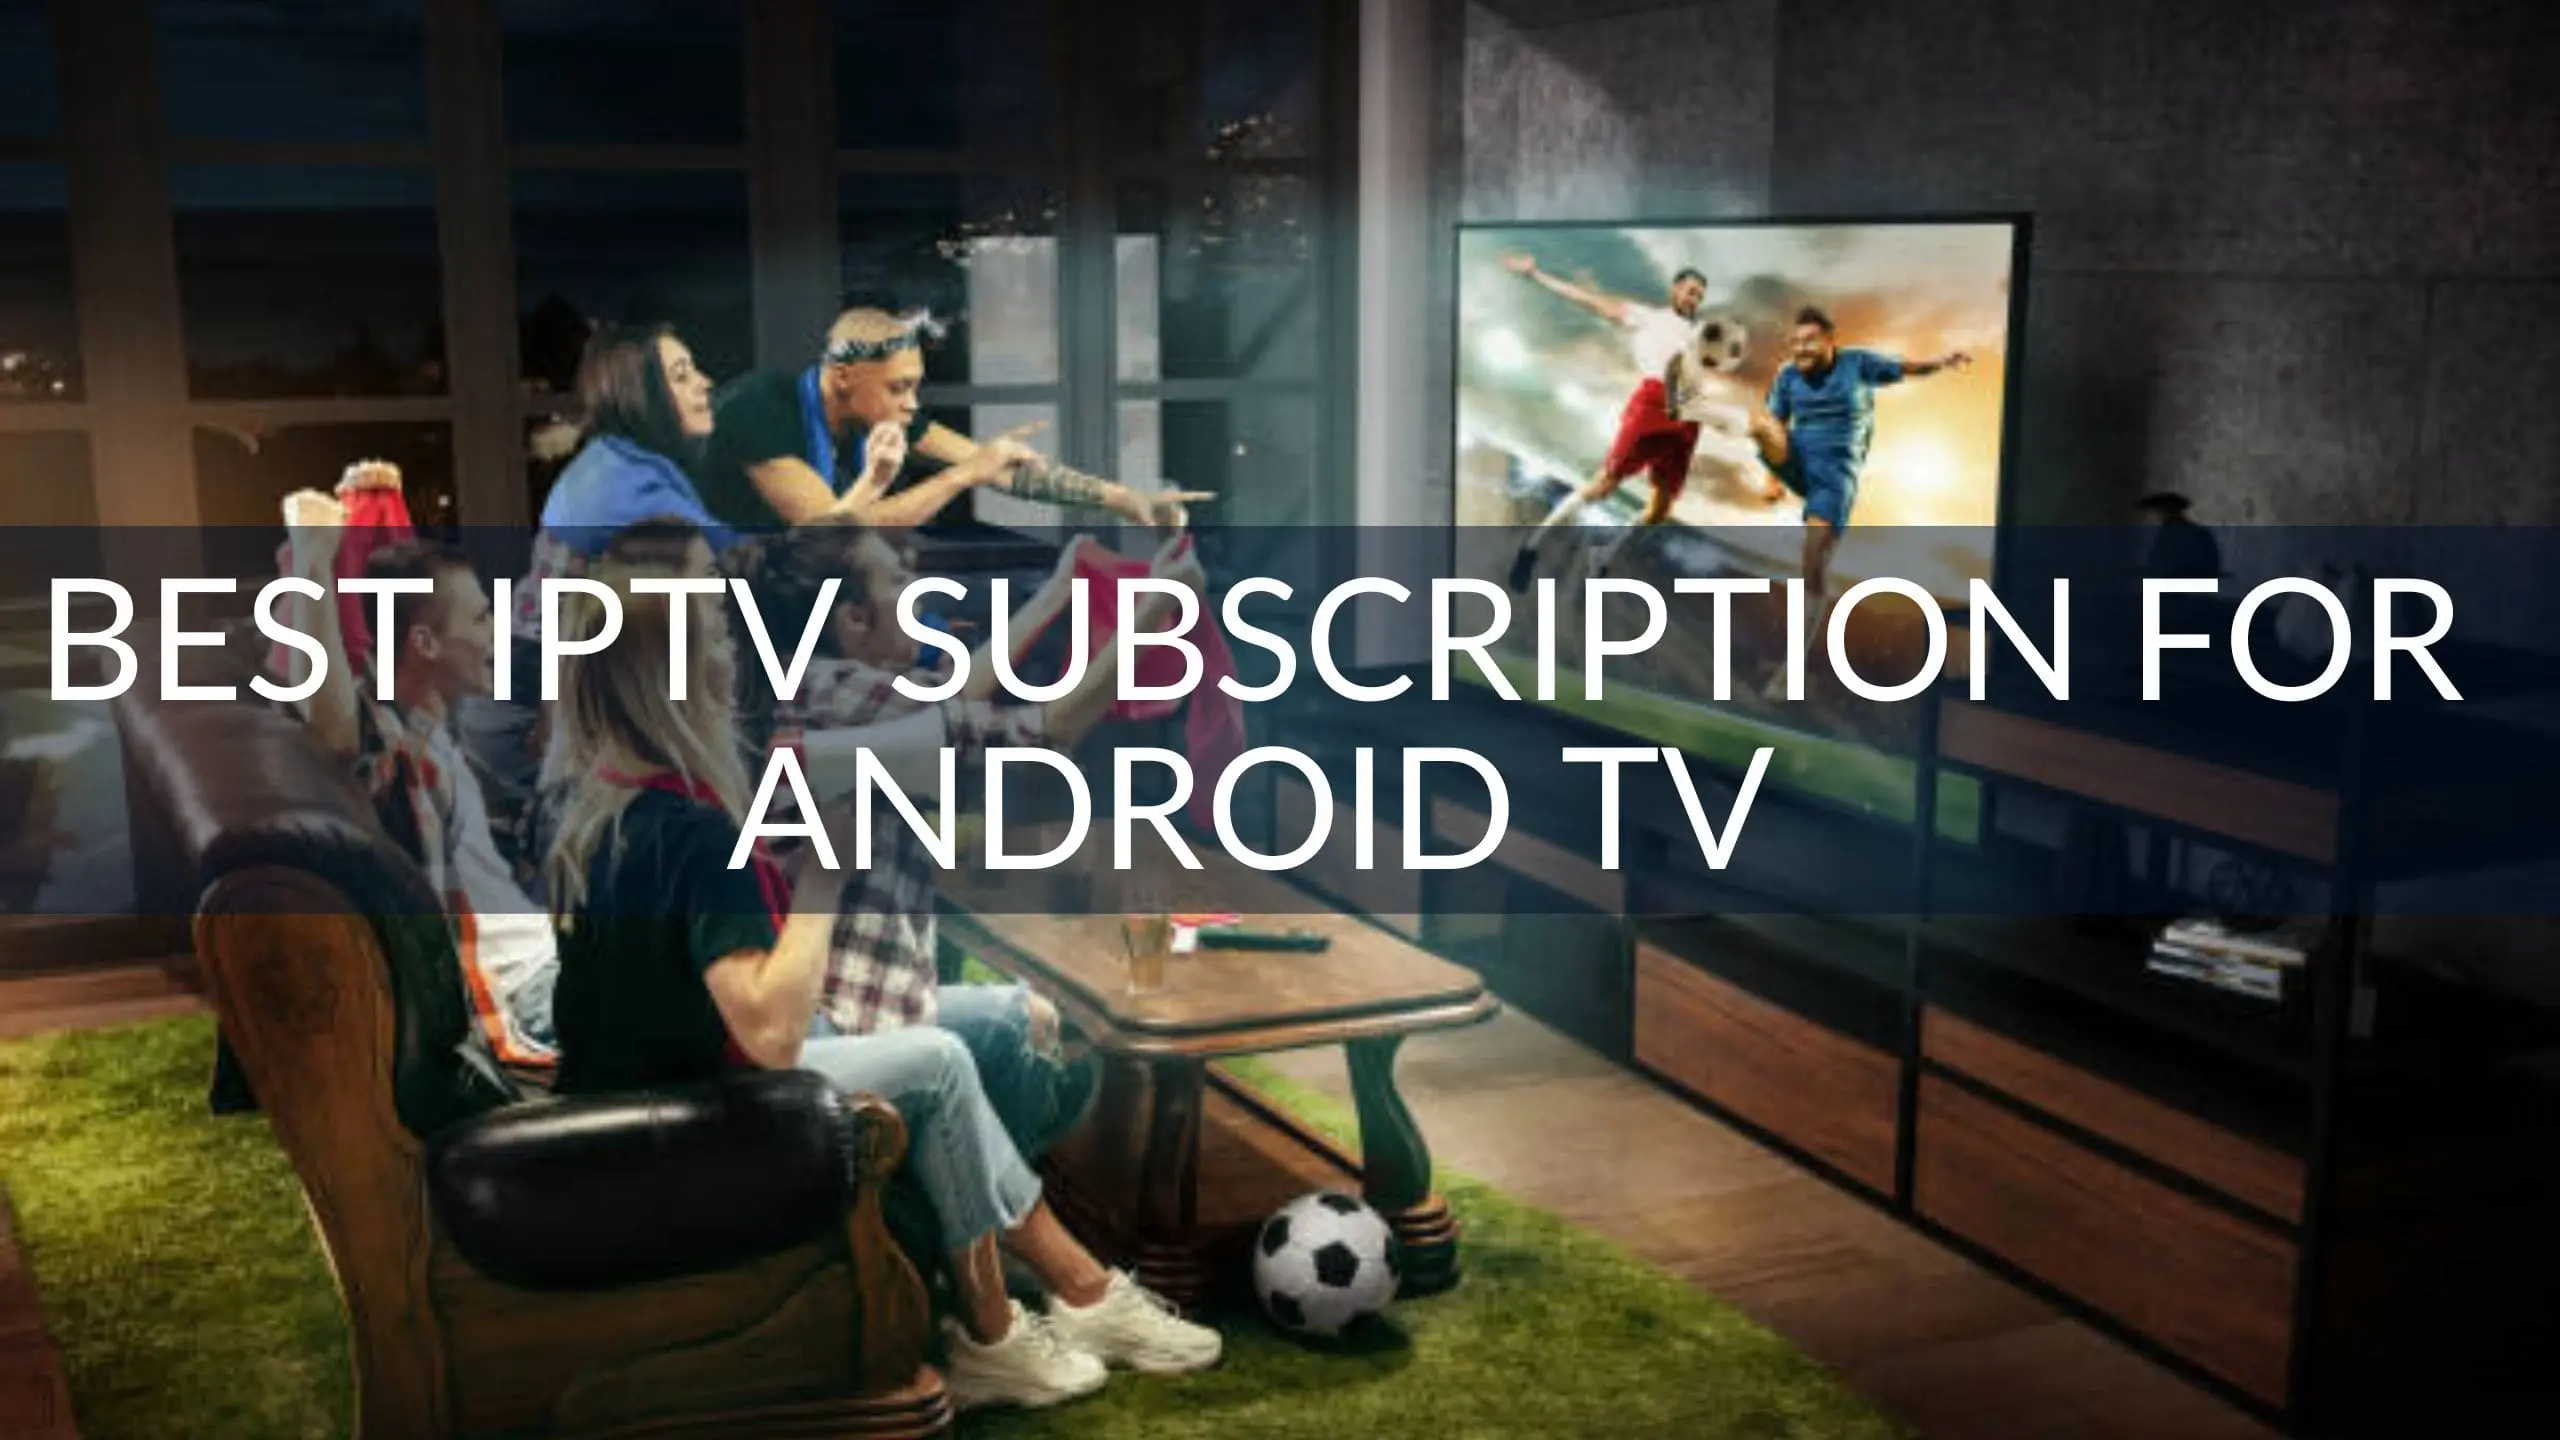 Best IPTV Subscription for Android TV